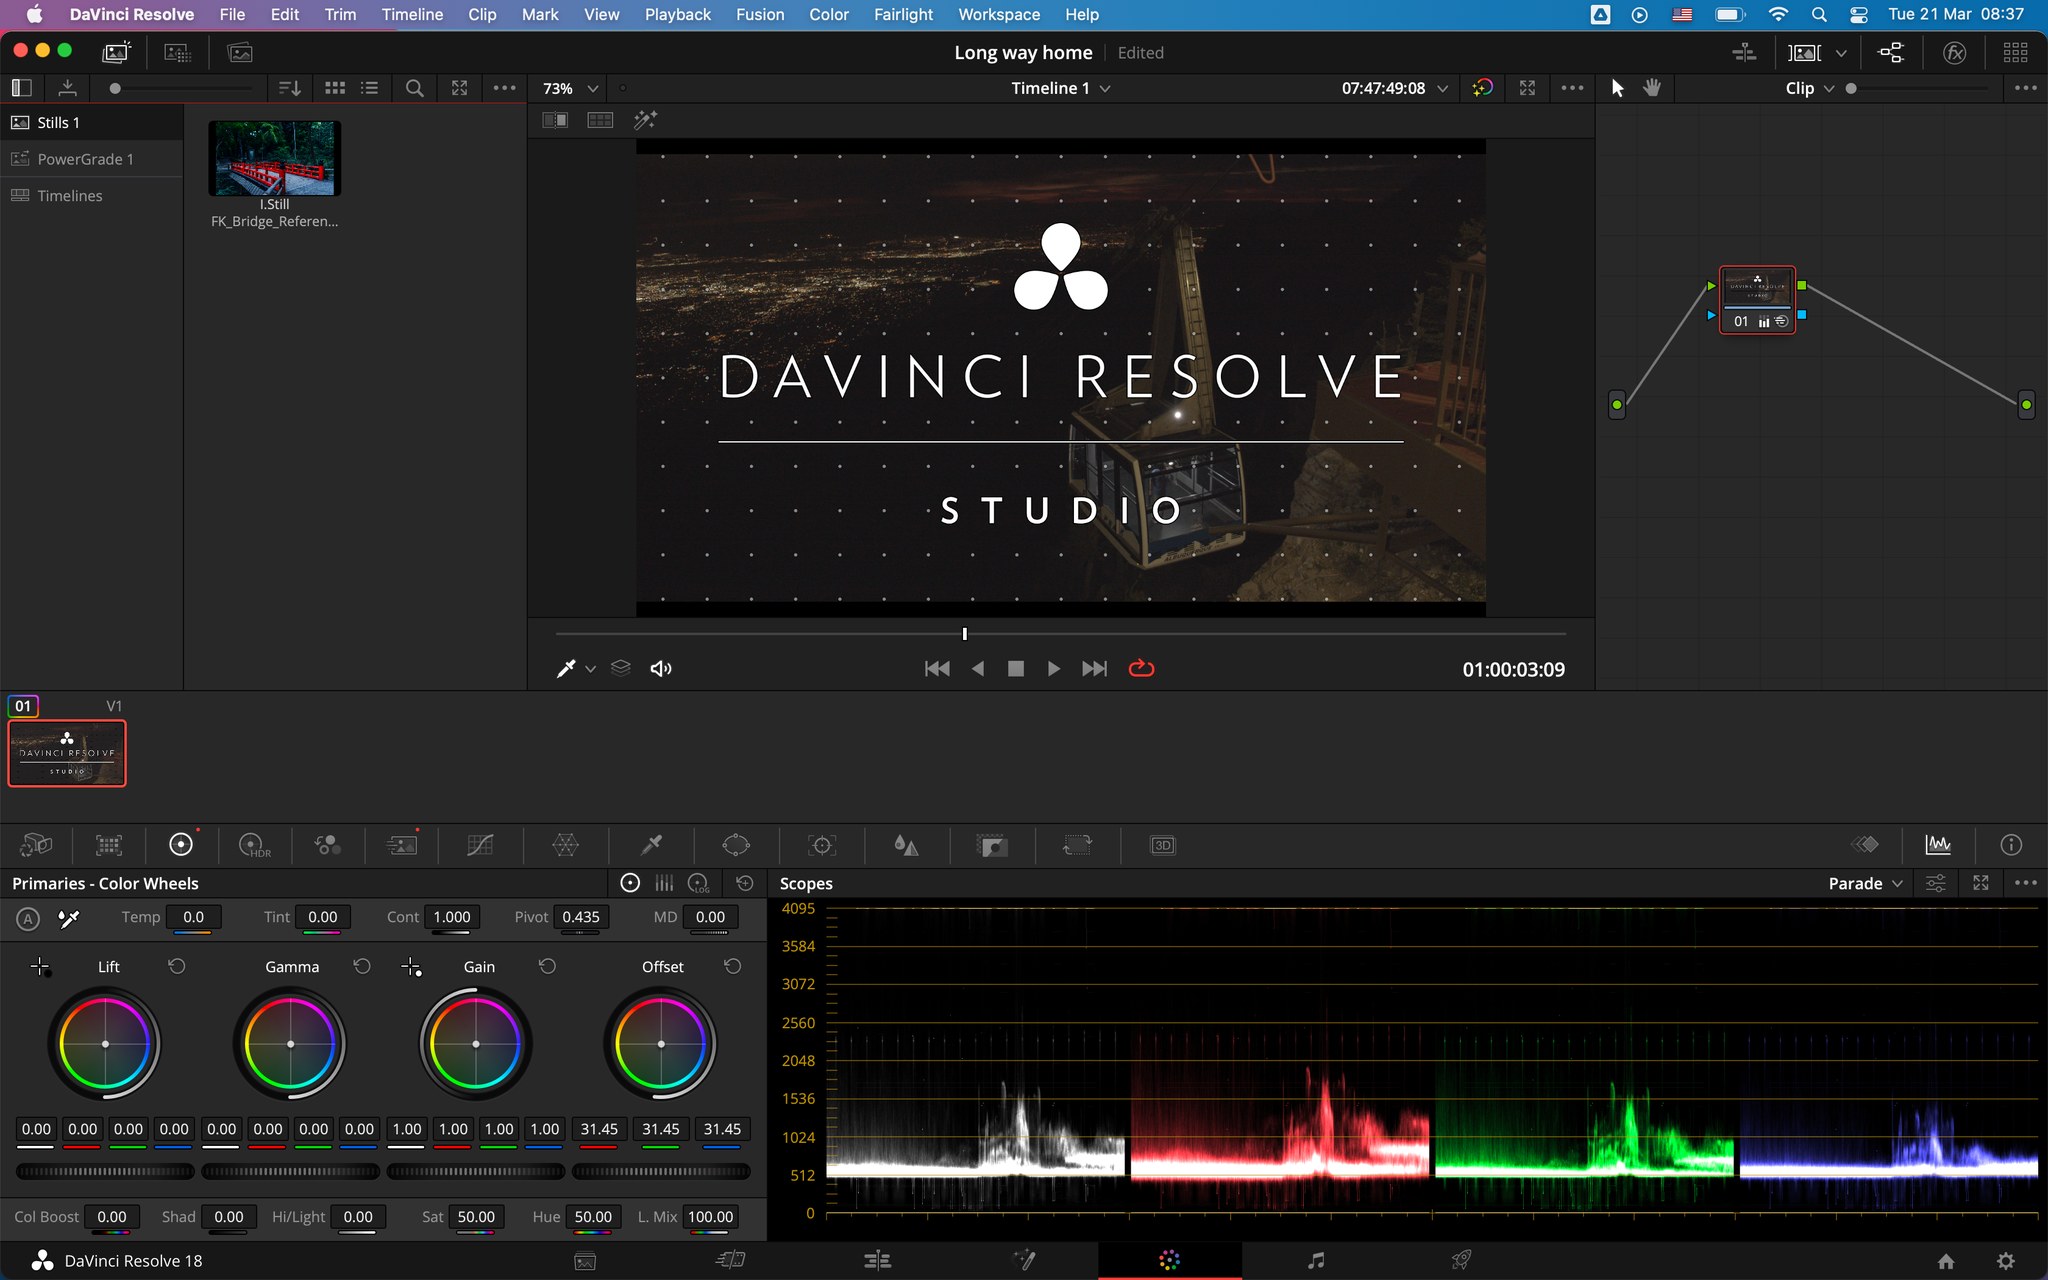 DaVinci Resolve - what are the differences between free and Studio